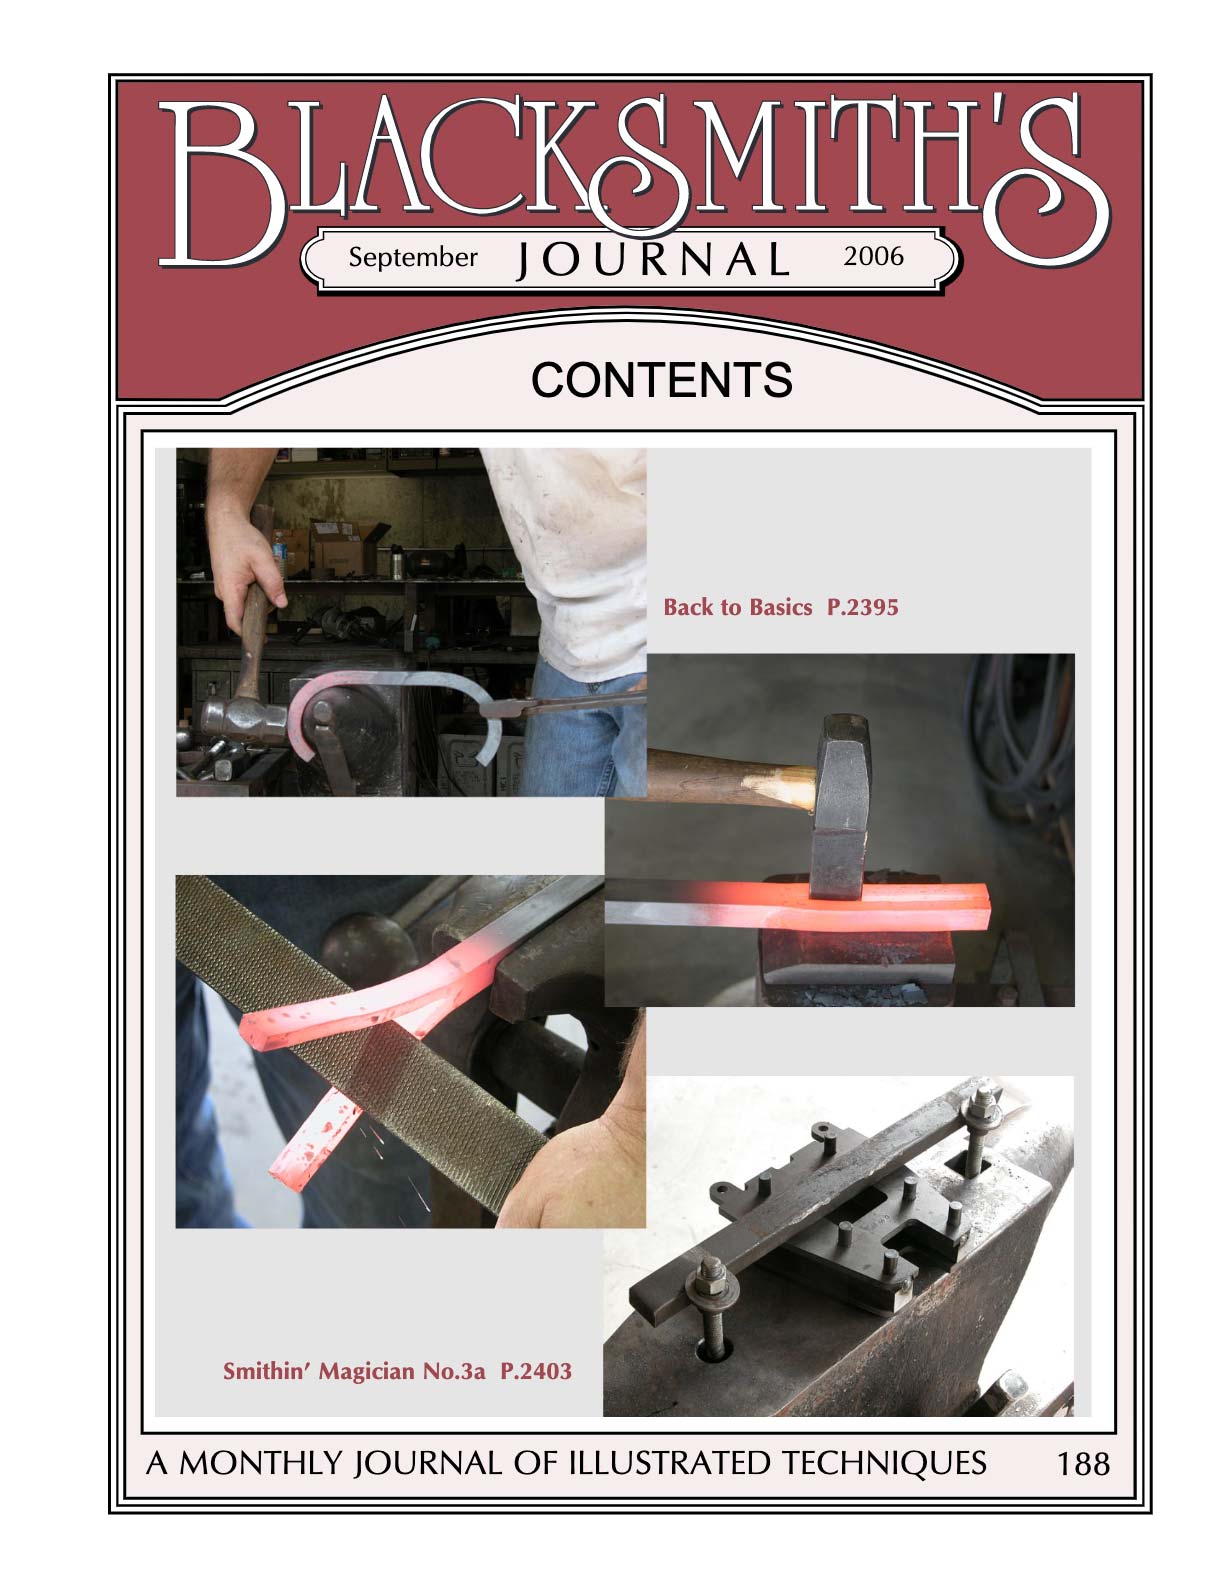 Cover image of Blacksmith's Journal with basic circles article.